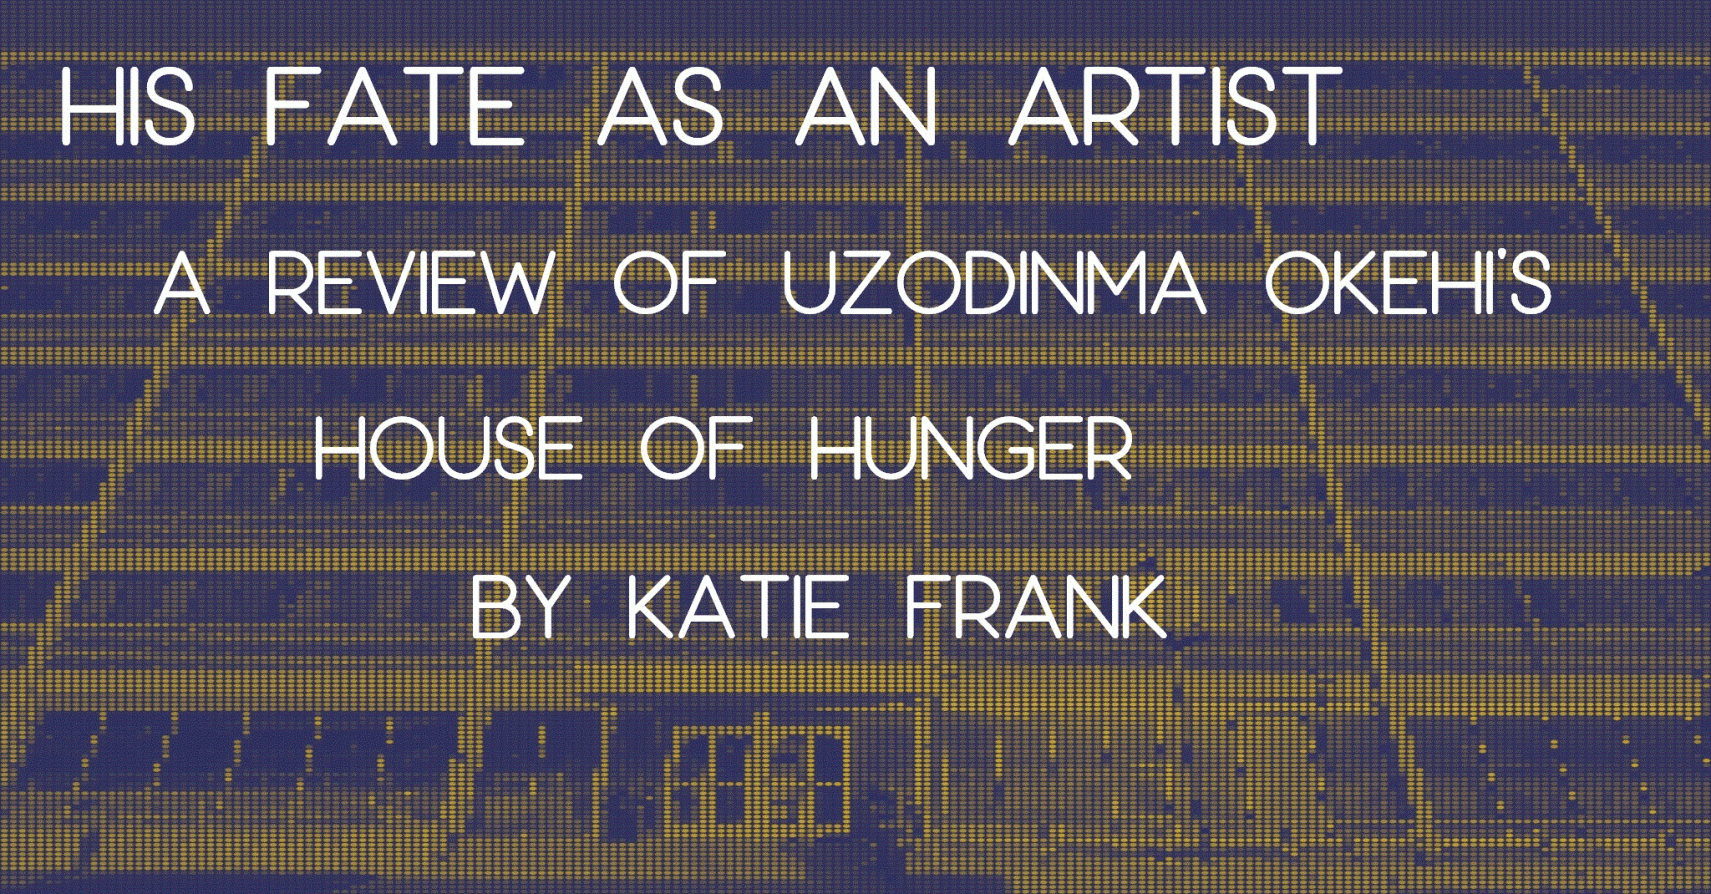 HIS FATE AS AN ARTIST: A Review of Uzodinma Okehi’s HOUSE OF HUNGER